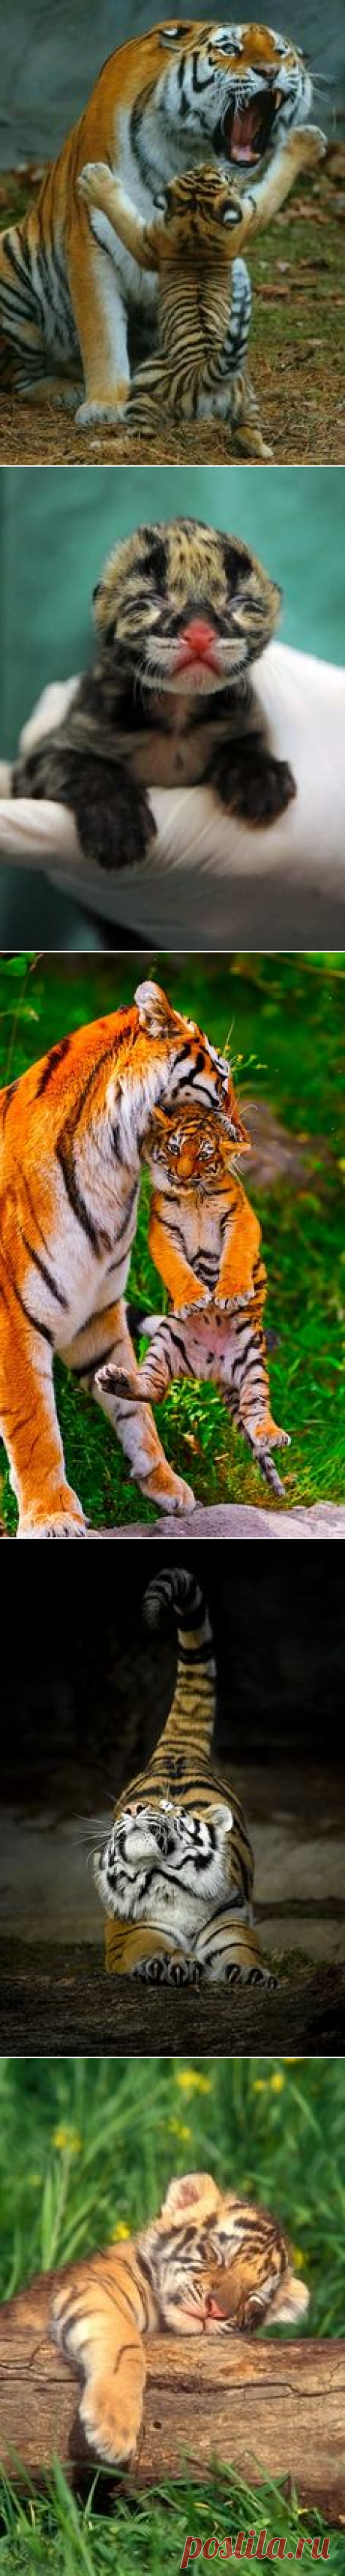 Tigers | Great &amp; Small | Мама, Детеныши и Тигрята